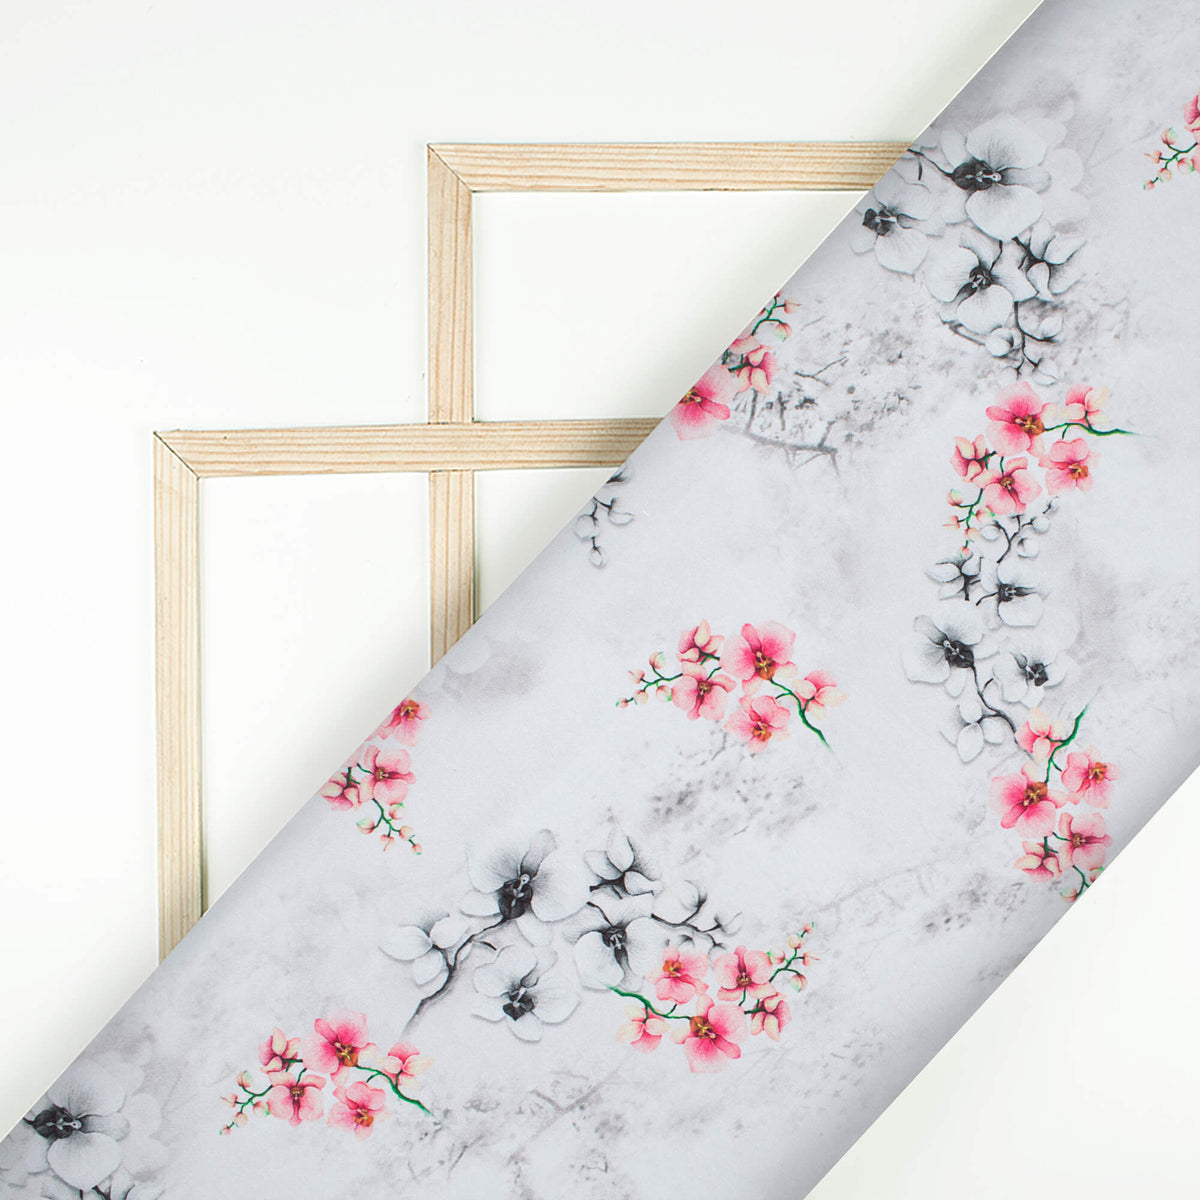 Off White And Taffy Pink Floral Pattern Digital Print Crepe Silk Fabric